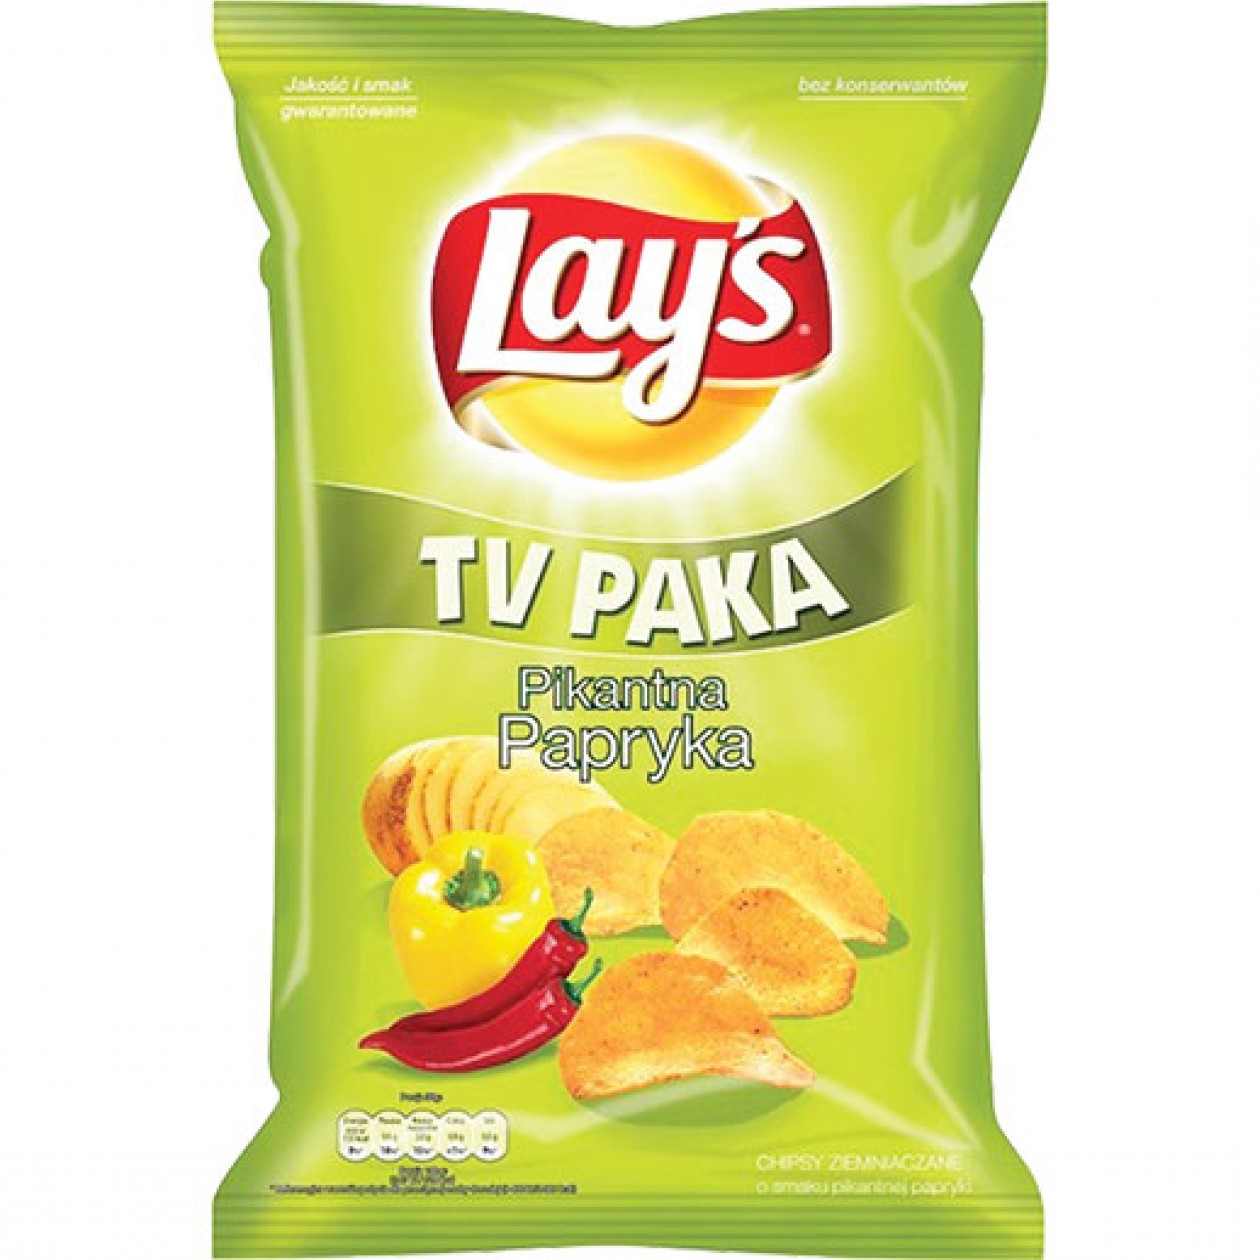 Lays Paprica Hot (Pikantna Papryka) (Green)20x150g(or 140g)